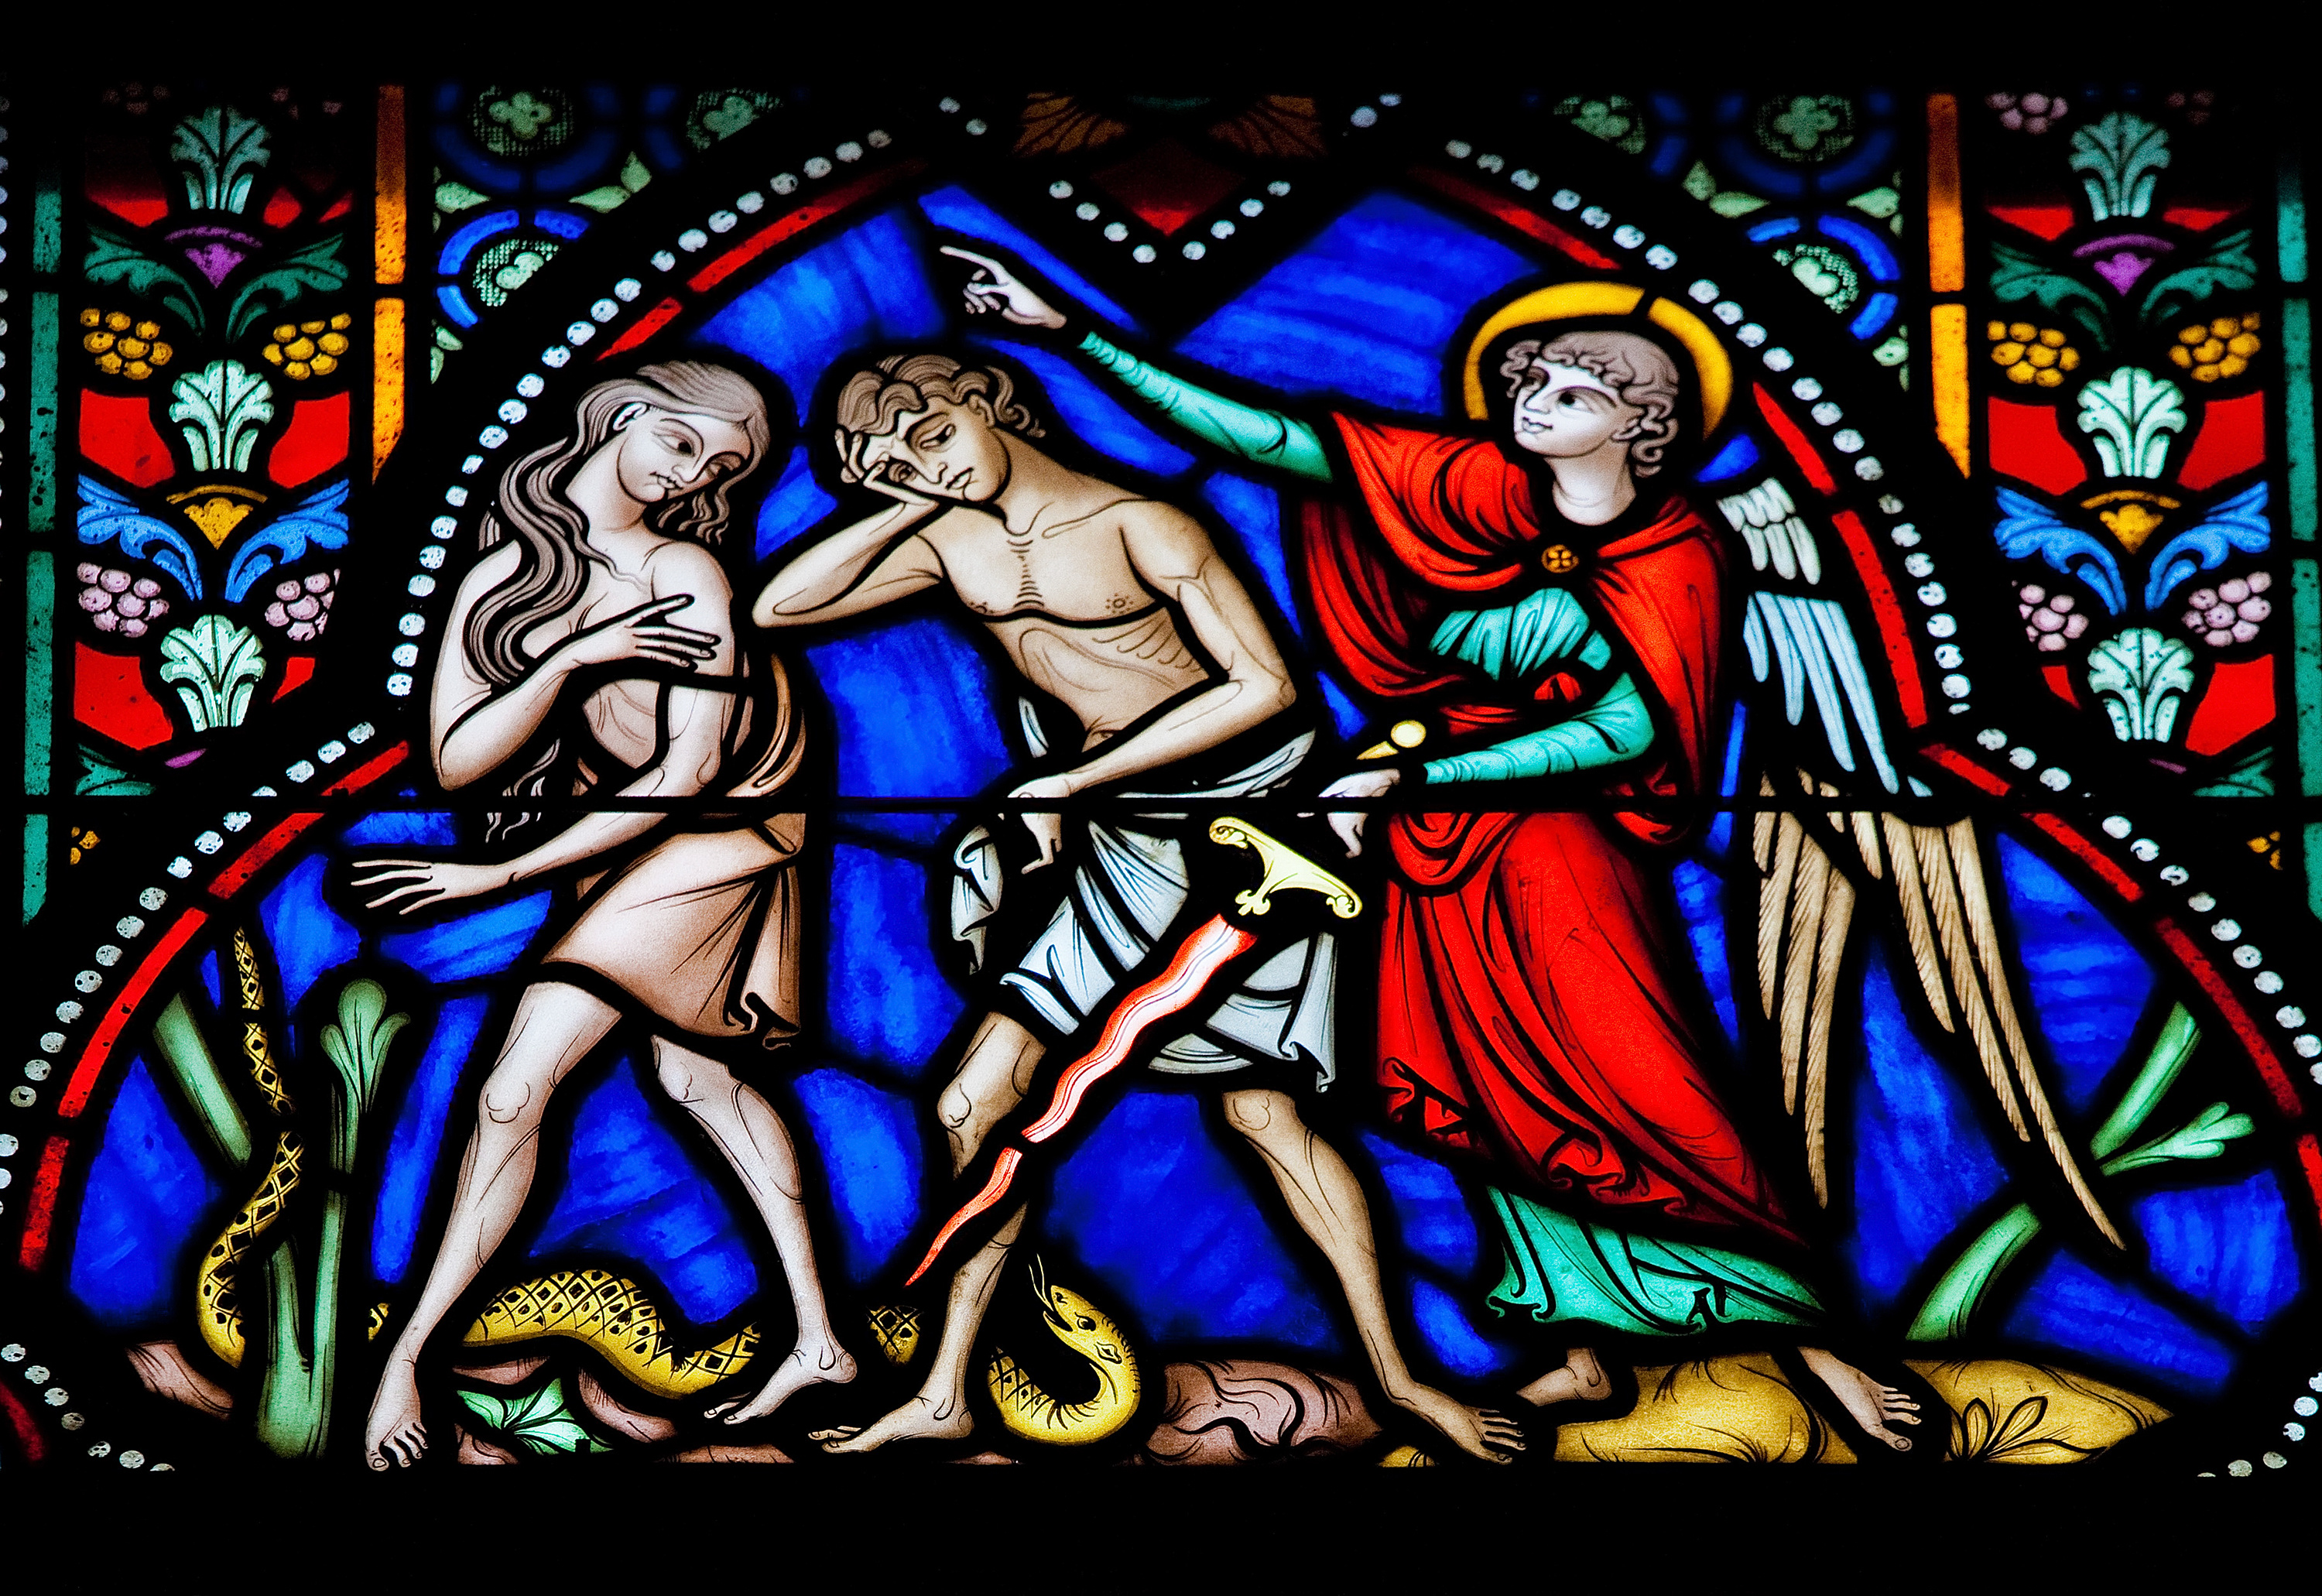 "The Sinners are Expelled from Paradise" stained glass panel from Auxerre Cathedral